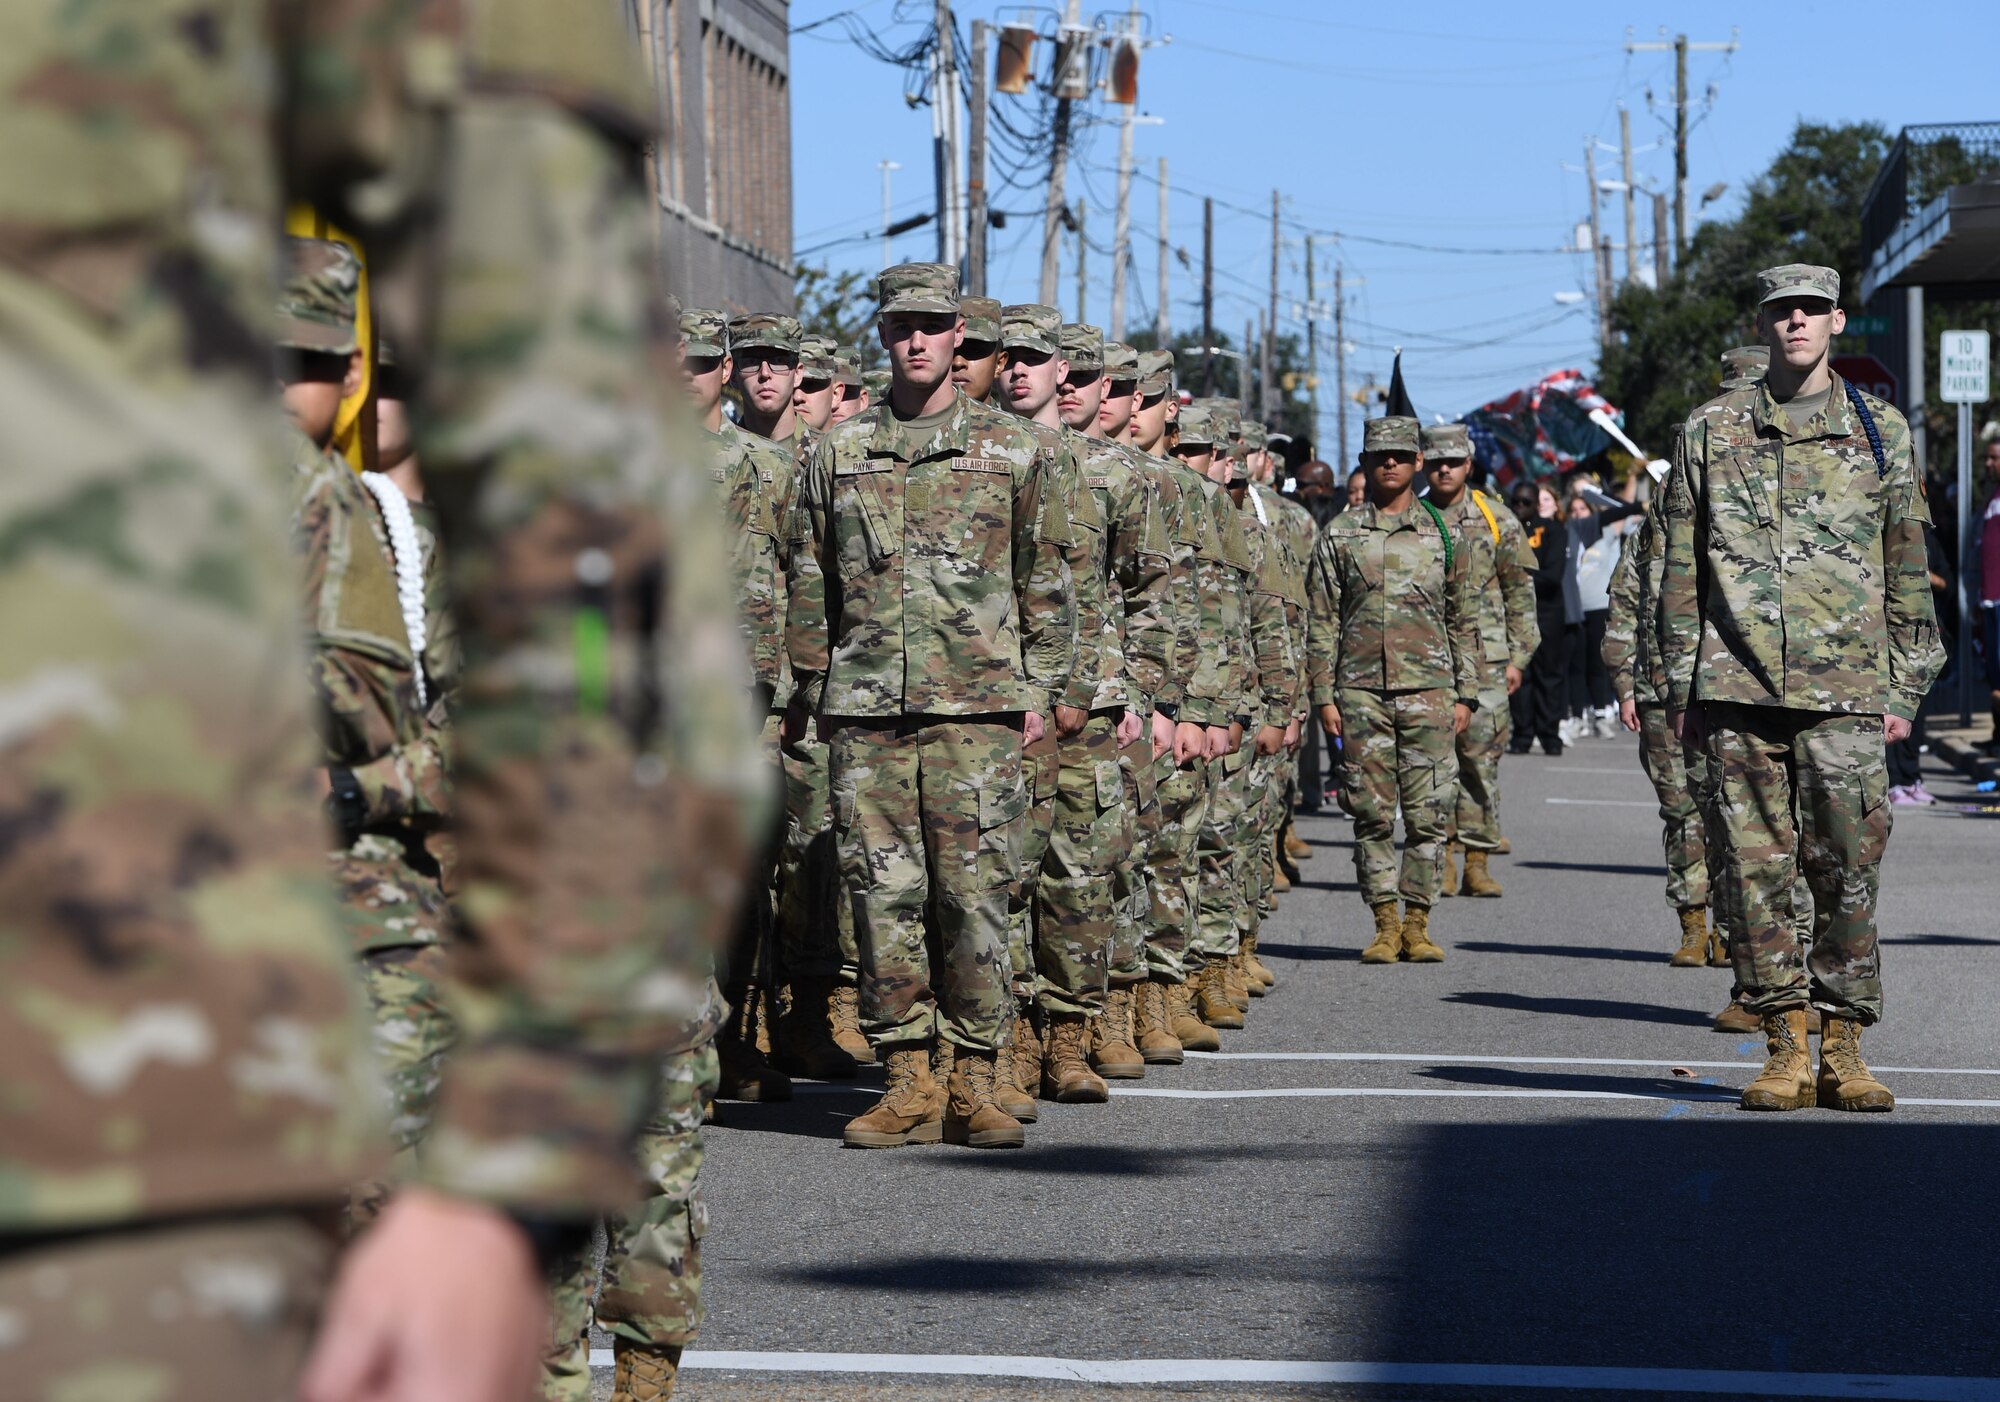 Airmen from the 81st Training Group march in the 21st Annual Gulf Coast Veterans Day Parade in Biloxi, Mississippi, Nov. 6, 2021. Keesler Air Force Base leadership, along with hundreds of Airmen, attended and participated in the parade in support of all veterans, past and present. More than 50 unique floats, marching bands and military units marched in the largest Veterans Day parade on the Gulf Coast. (U.S. Air Force photo by Kemberly Groue)